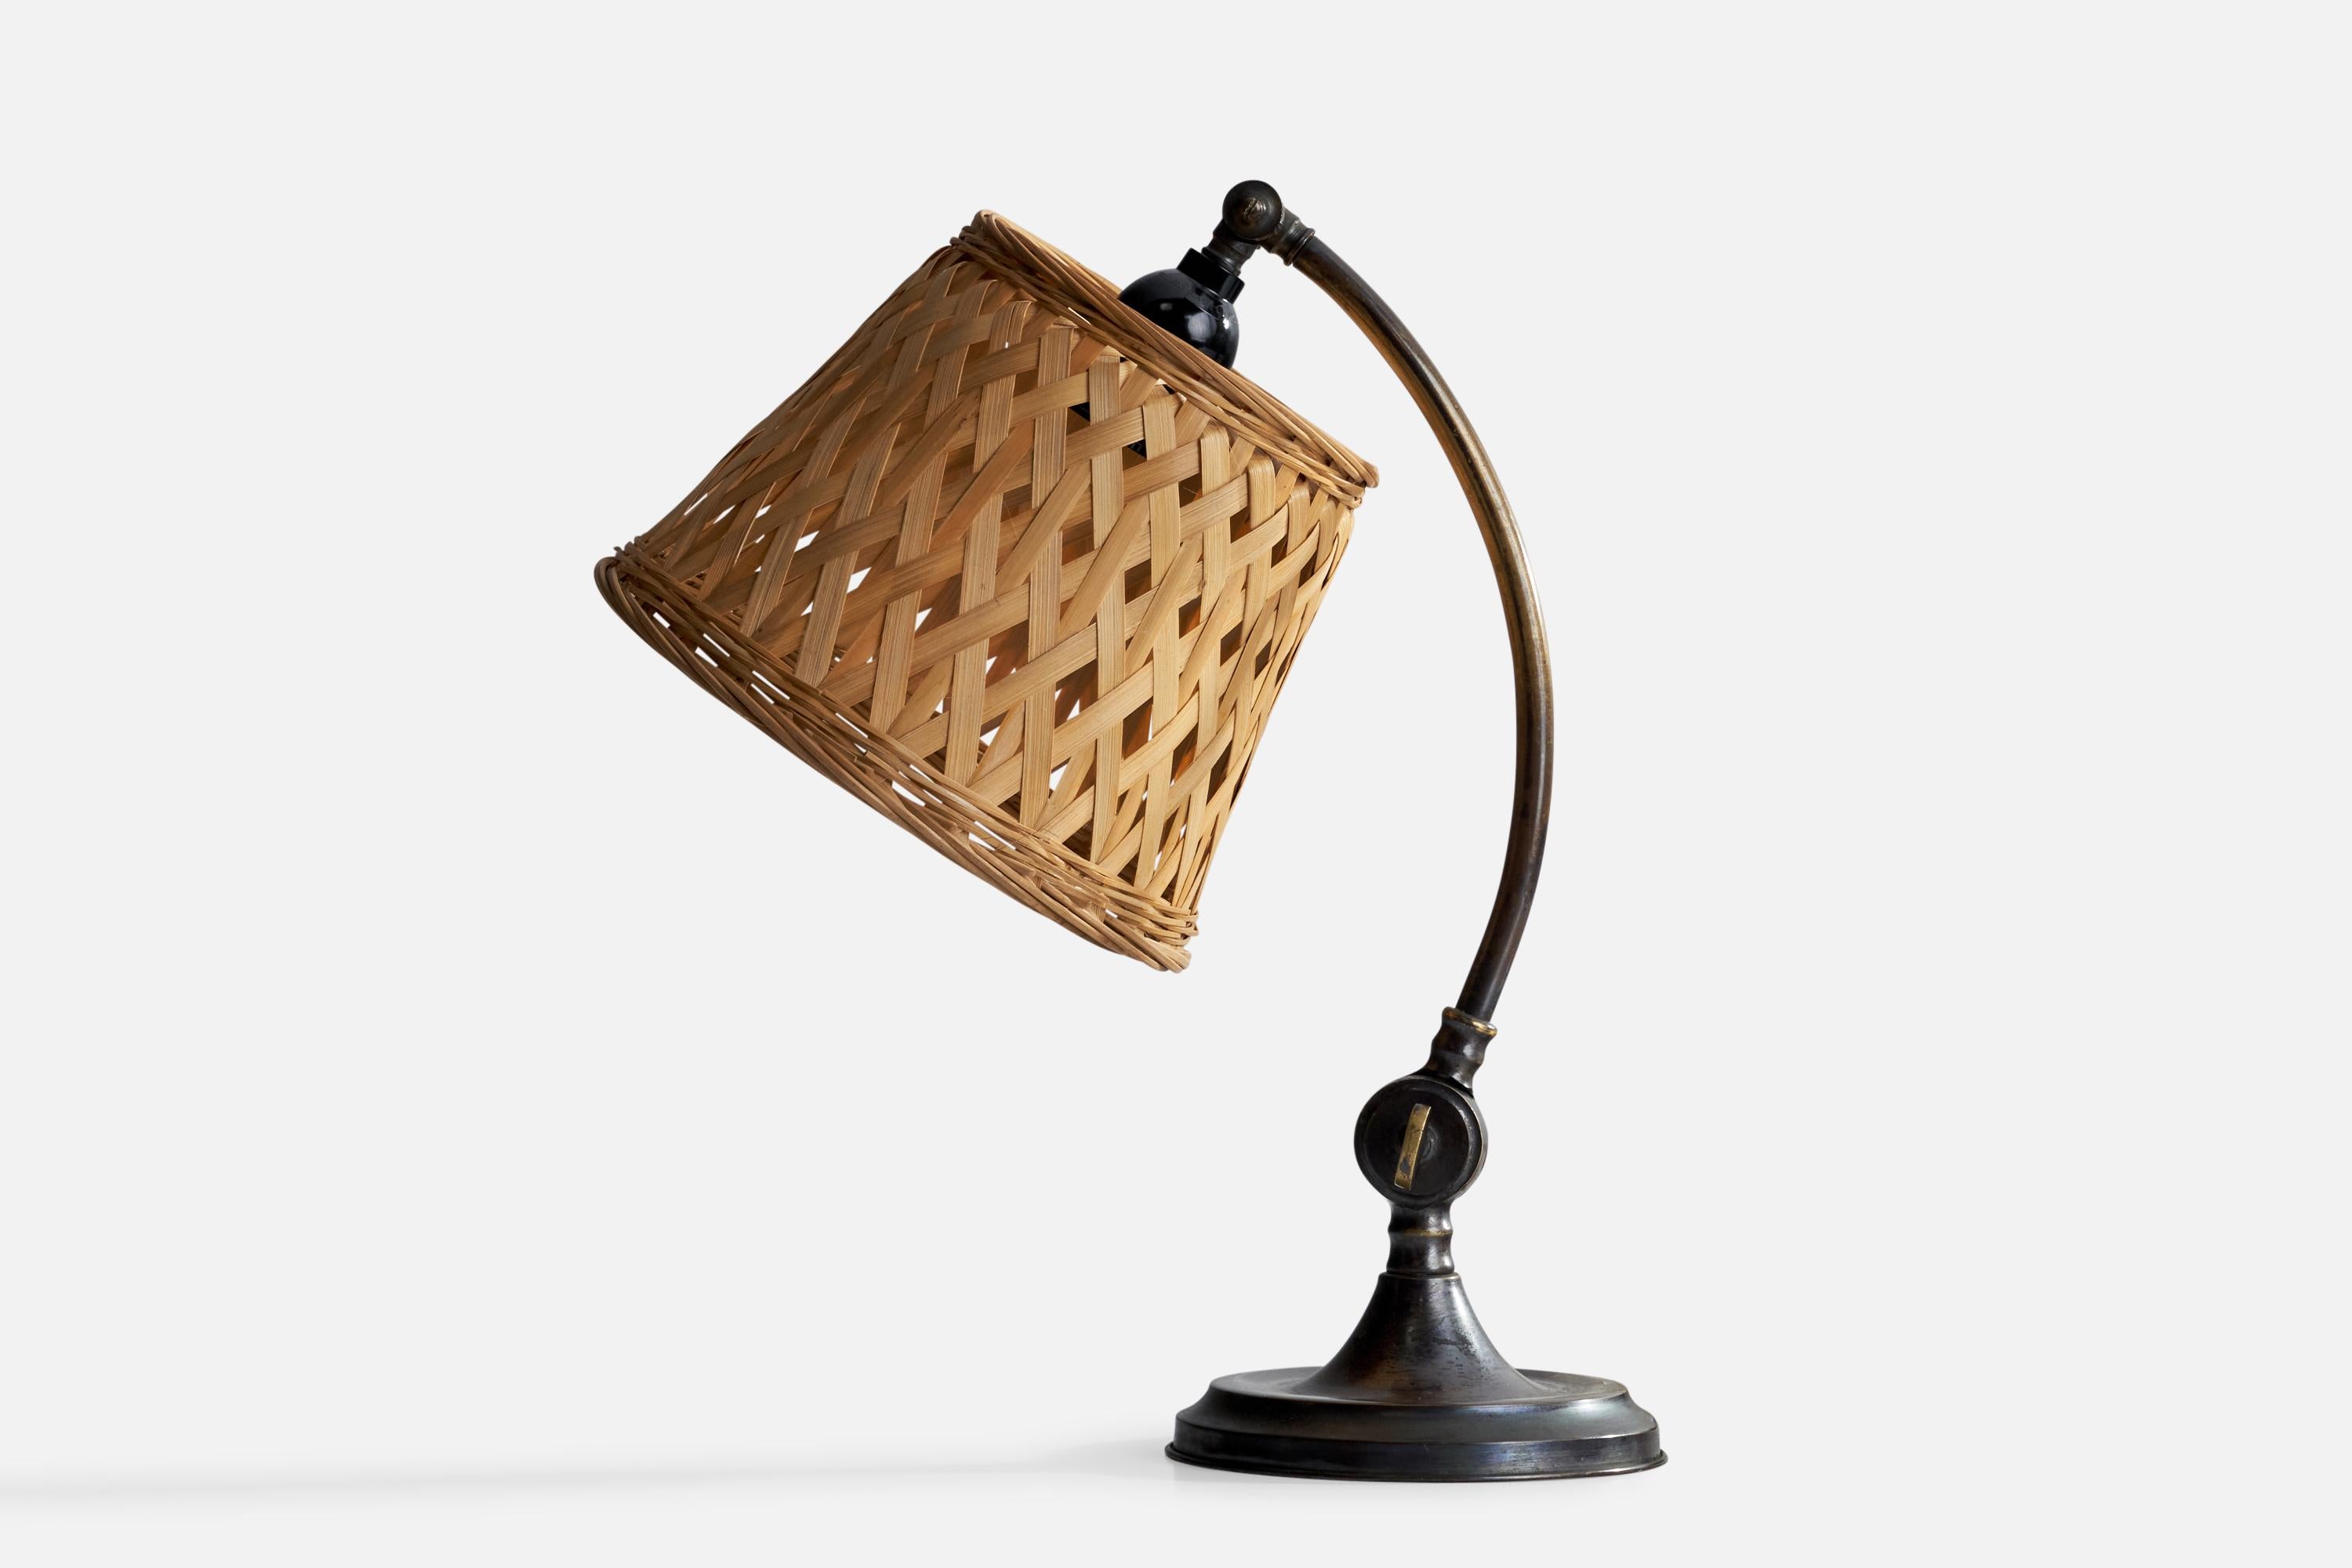 An adjustable brass and rattan table lamp designed and produced in Sweden, 1930s.

Overall Dimensions (inches): 15” H x 8” W x 12.5” D
Stated dimensions include shade.
Bulb Specifications: E-26 Bulb
Number of Sockets: 1
All lighting will be